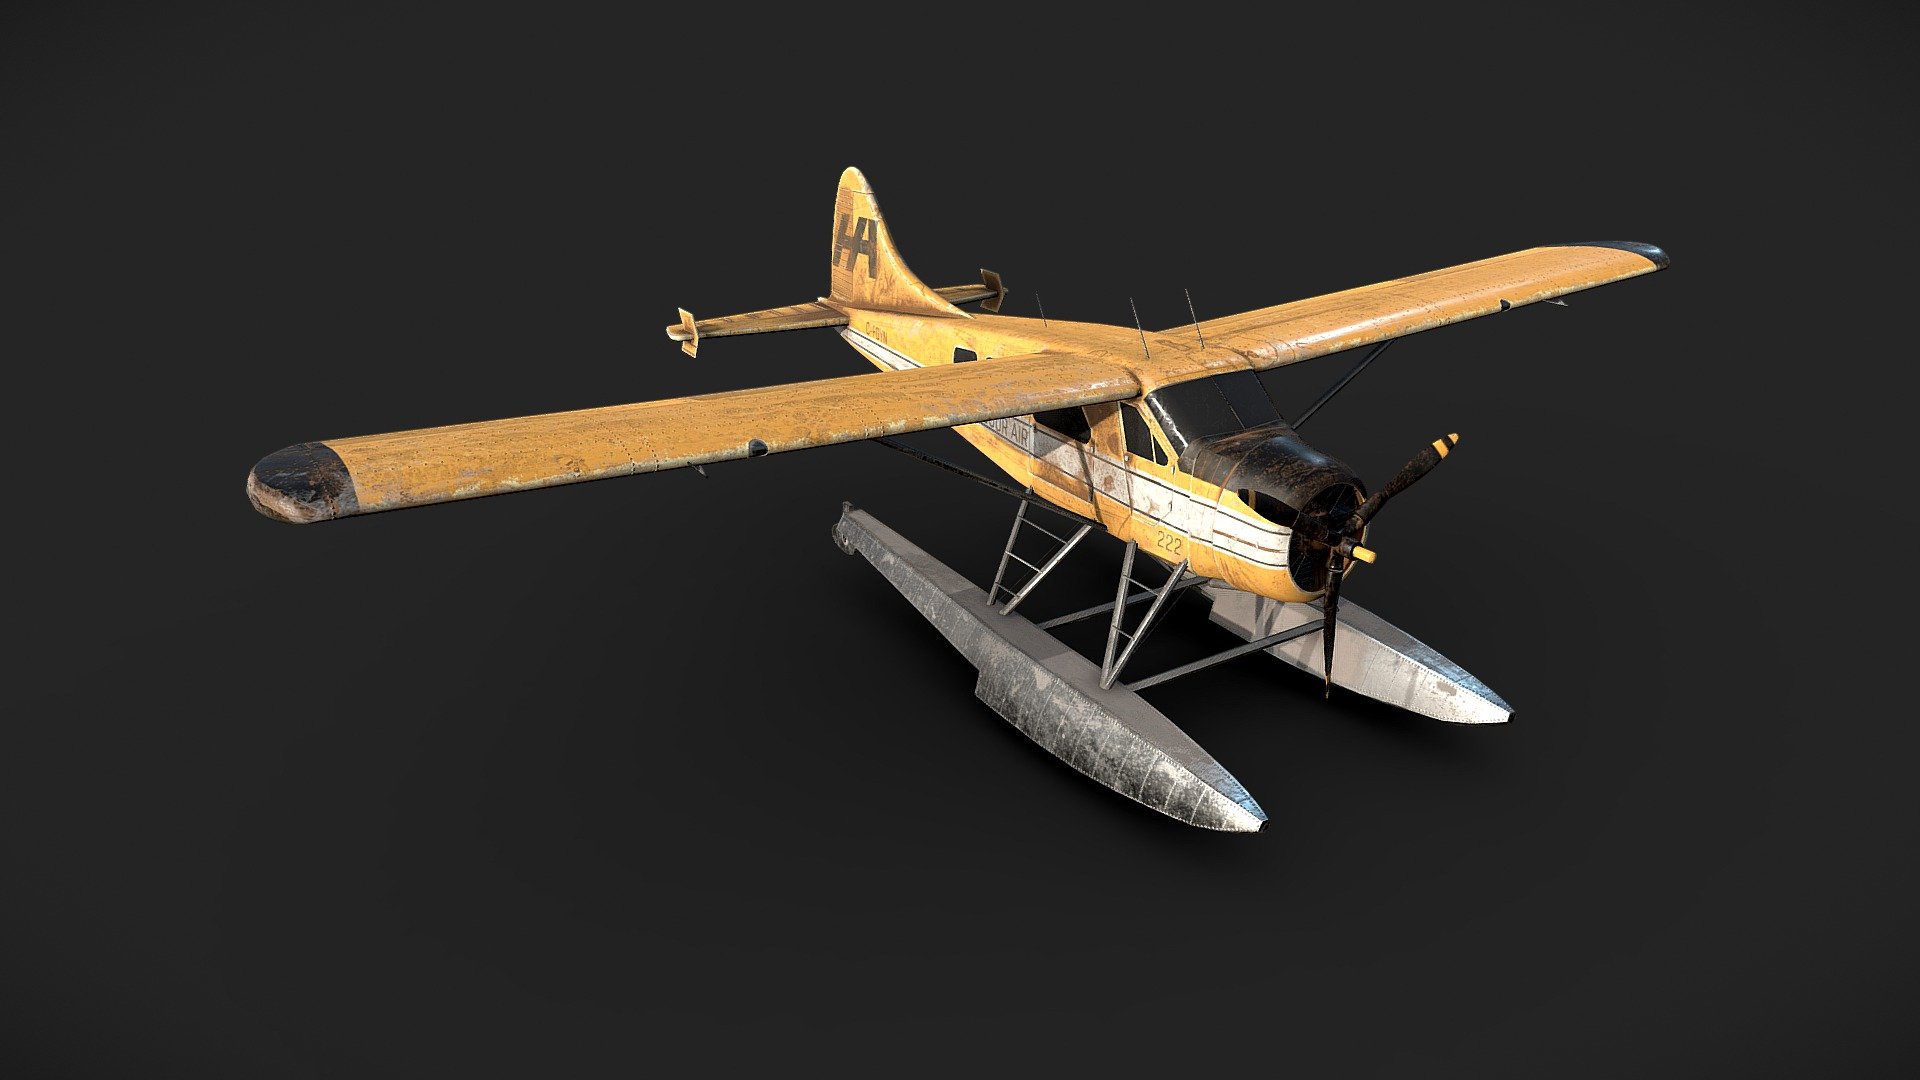 DHC-2 Beaver Seaplane (In House Project) Game Ready lowpoly DHC-2 Beaver Seaplane, modeling and texturing from scratch by 13 Particles.

For more artworks and updates follow us on:-

Instagram:- https://www.instagram.com/13particles/

Artstation:- https://thirteenparticles.artstation.com

Twitter:- https://twitter.com/13Particles

Facebook:- https://www.facebook.com/13Particles/

Linkedin:- https://www.linkedin.com/company/13particles - DHC-2 Beaver Seaplane (In House Project) - 3D model by 13 Particles (@13particles) 3d model